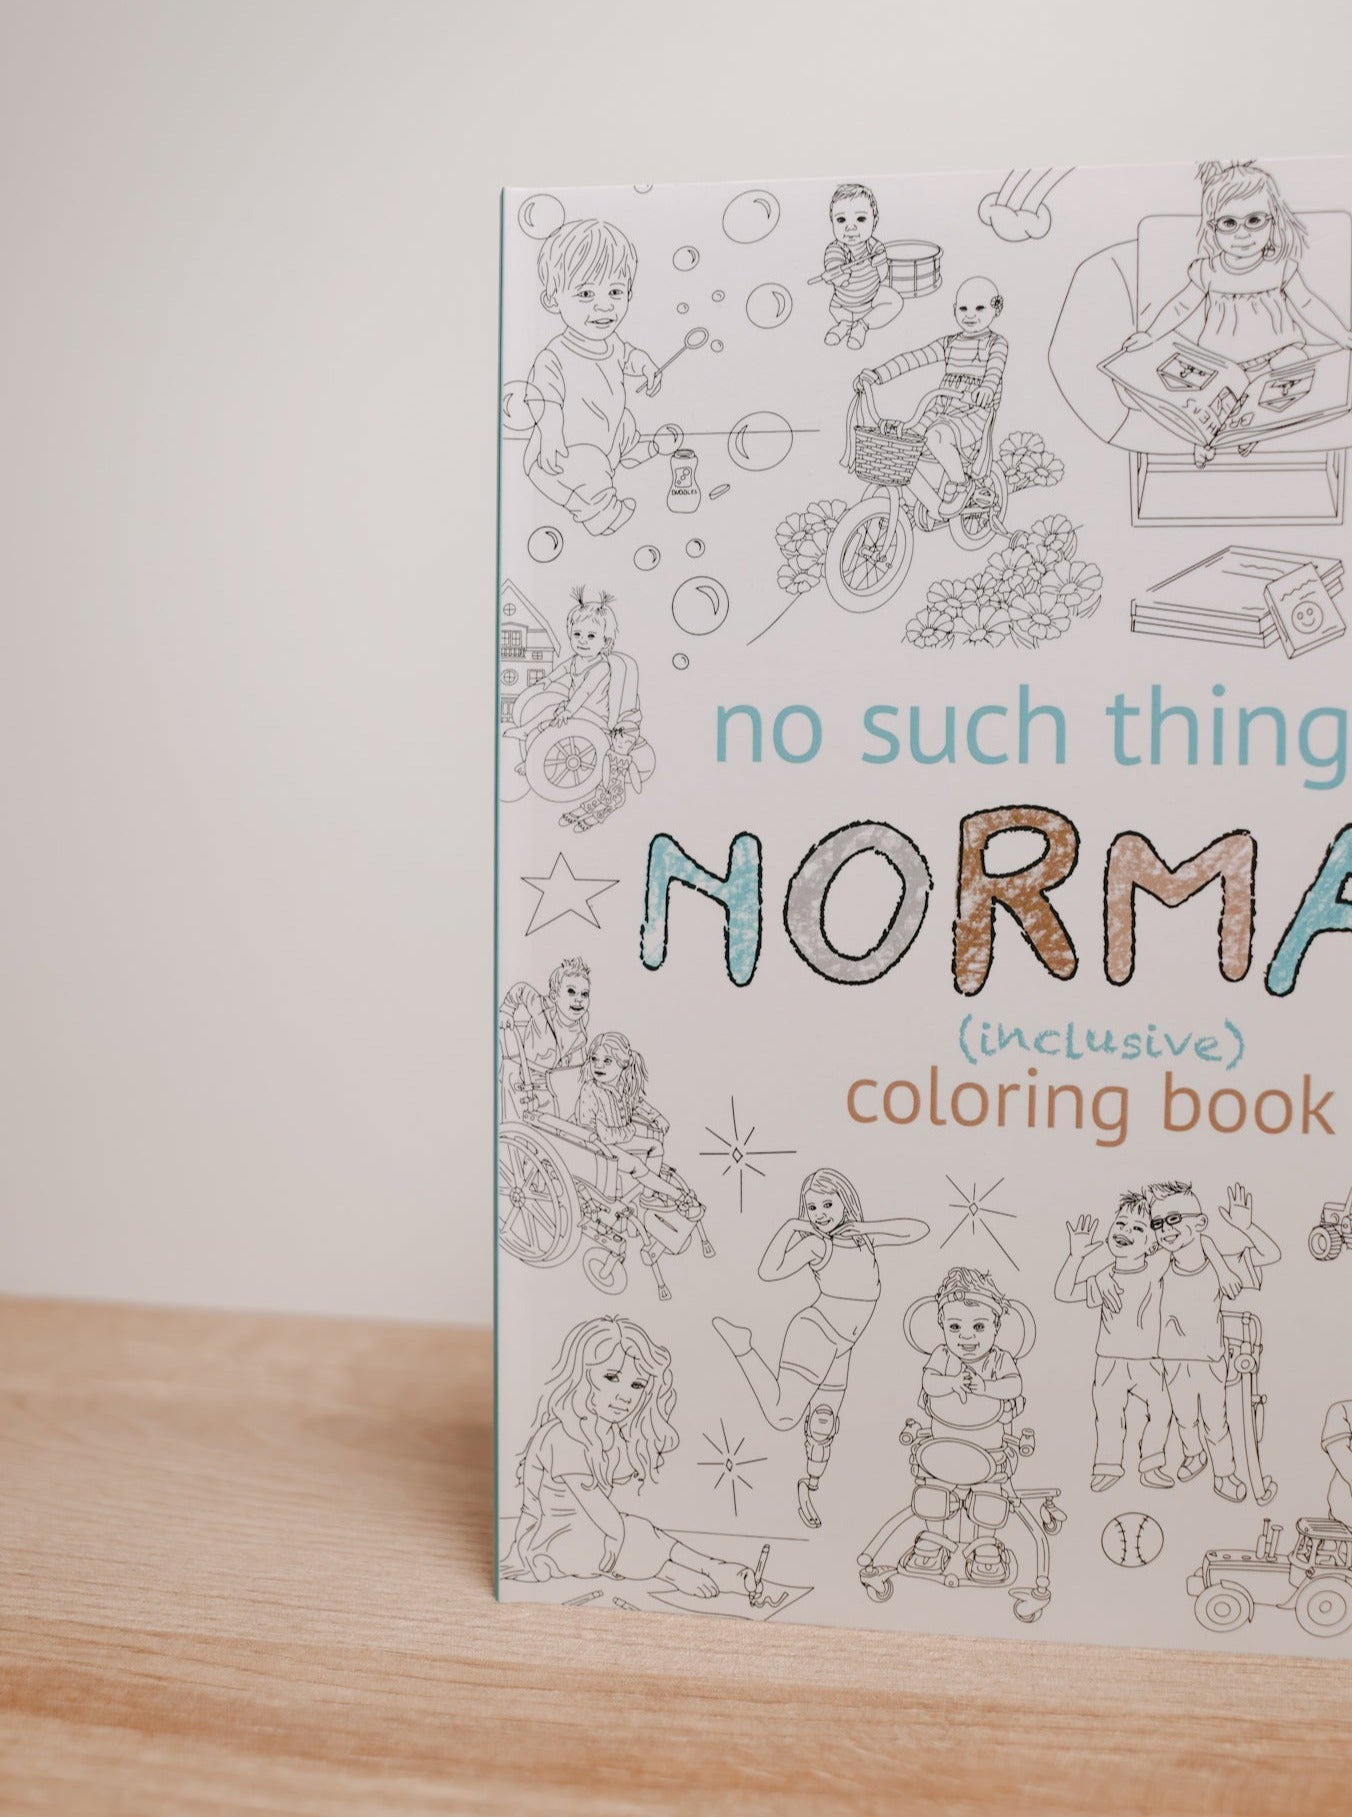 Market Research Shows Coloring Books Aren't Just For Kids